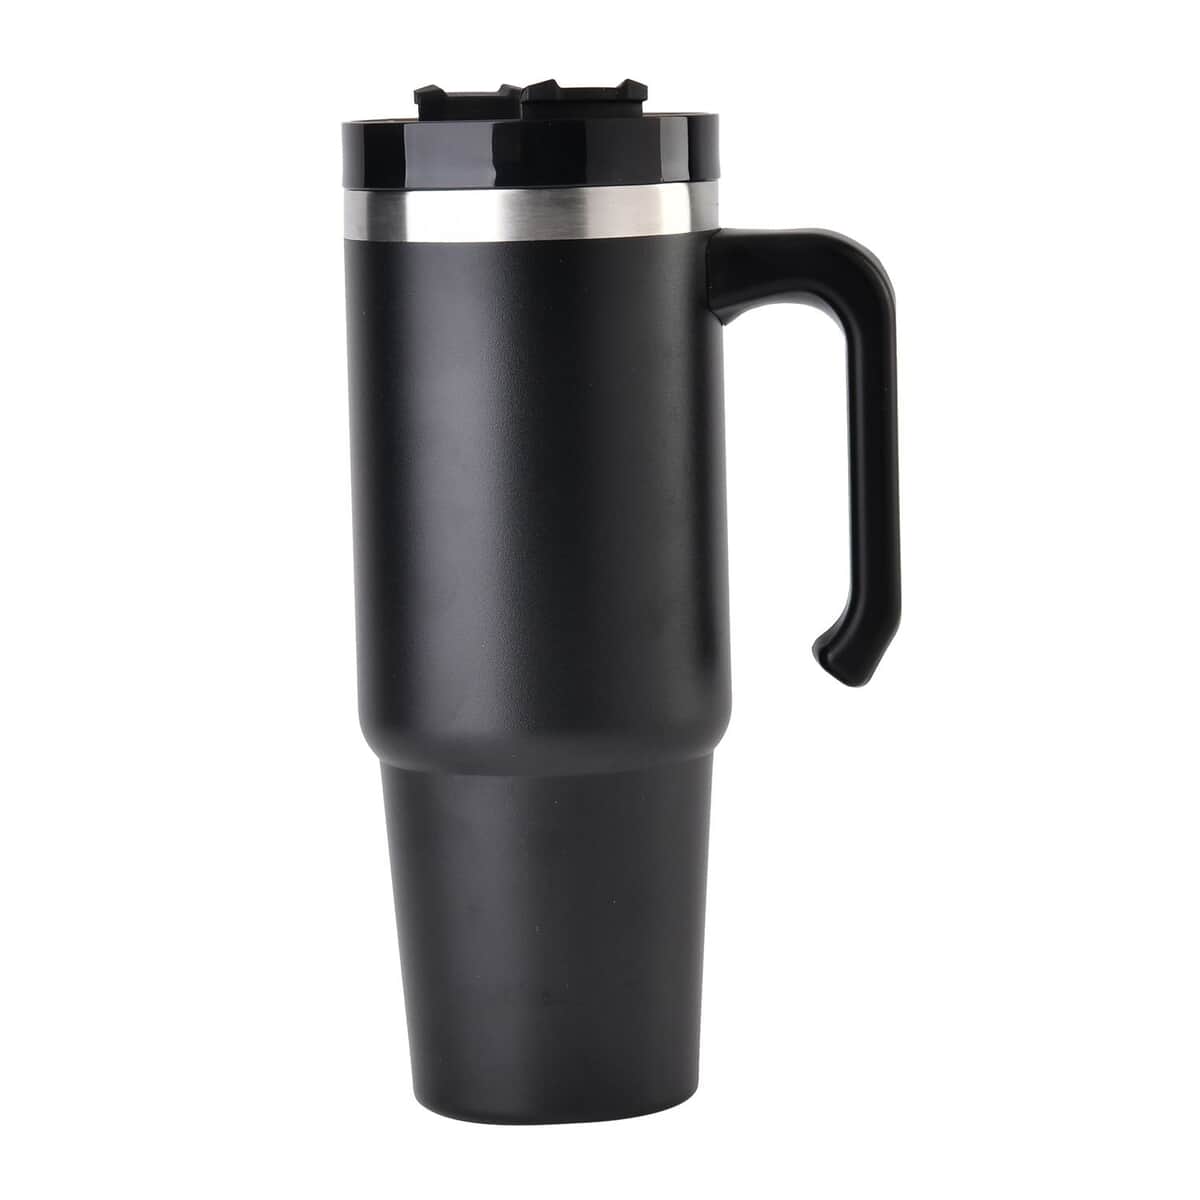 30oz Stainless Steel Cup with Straw - Black image number 4